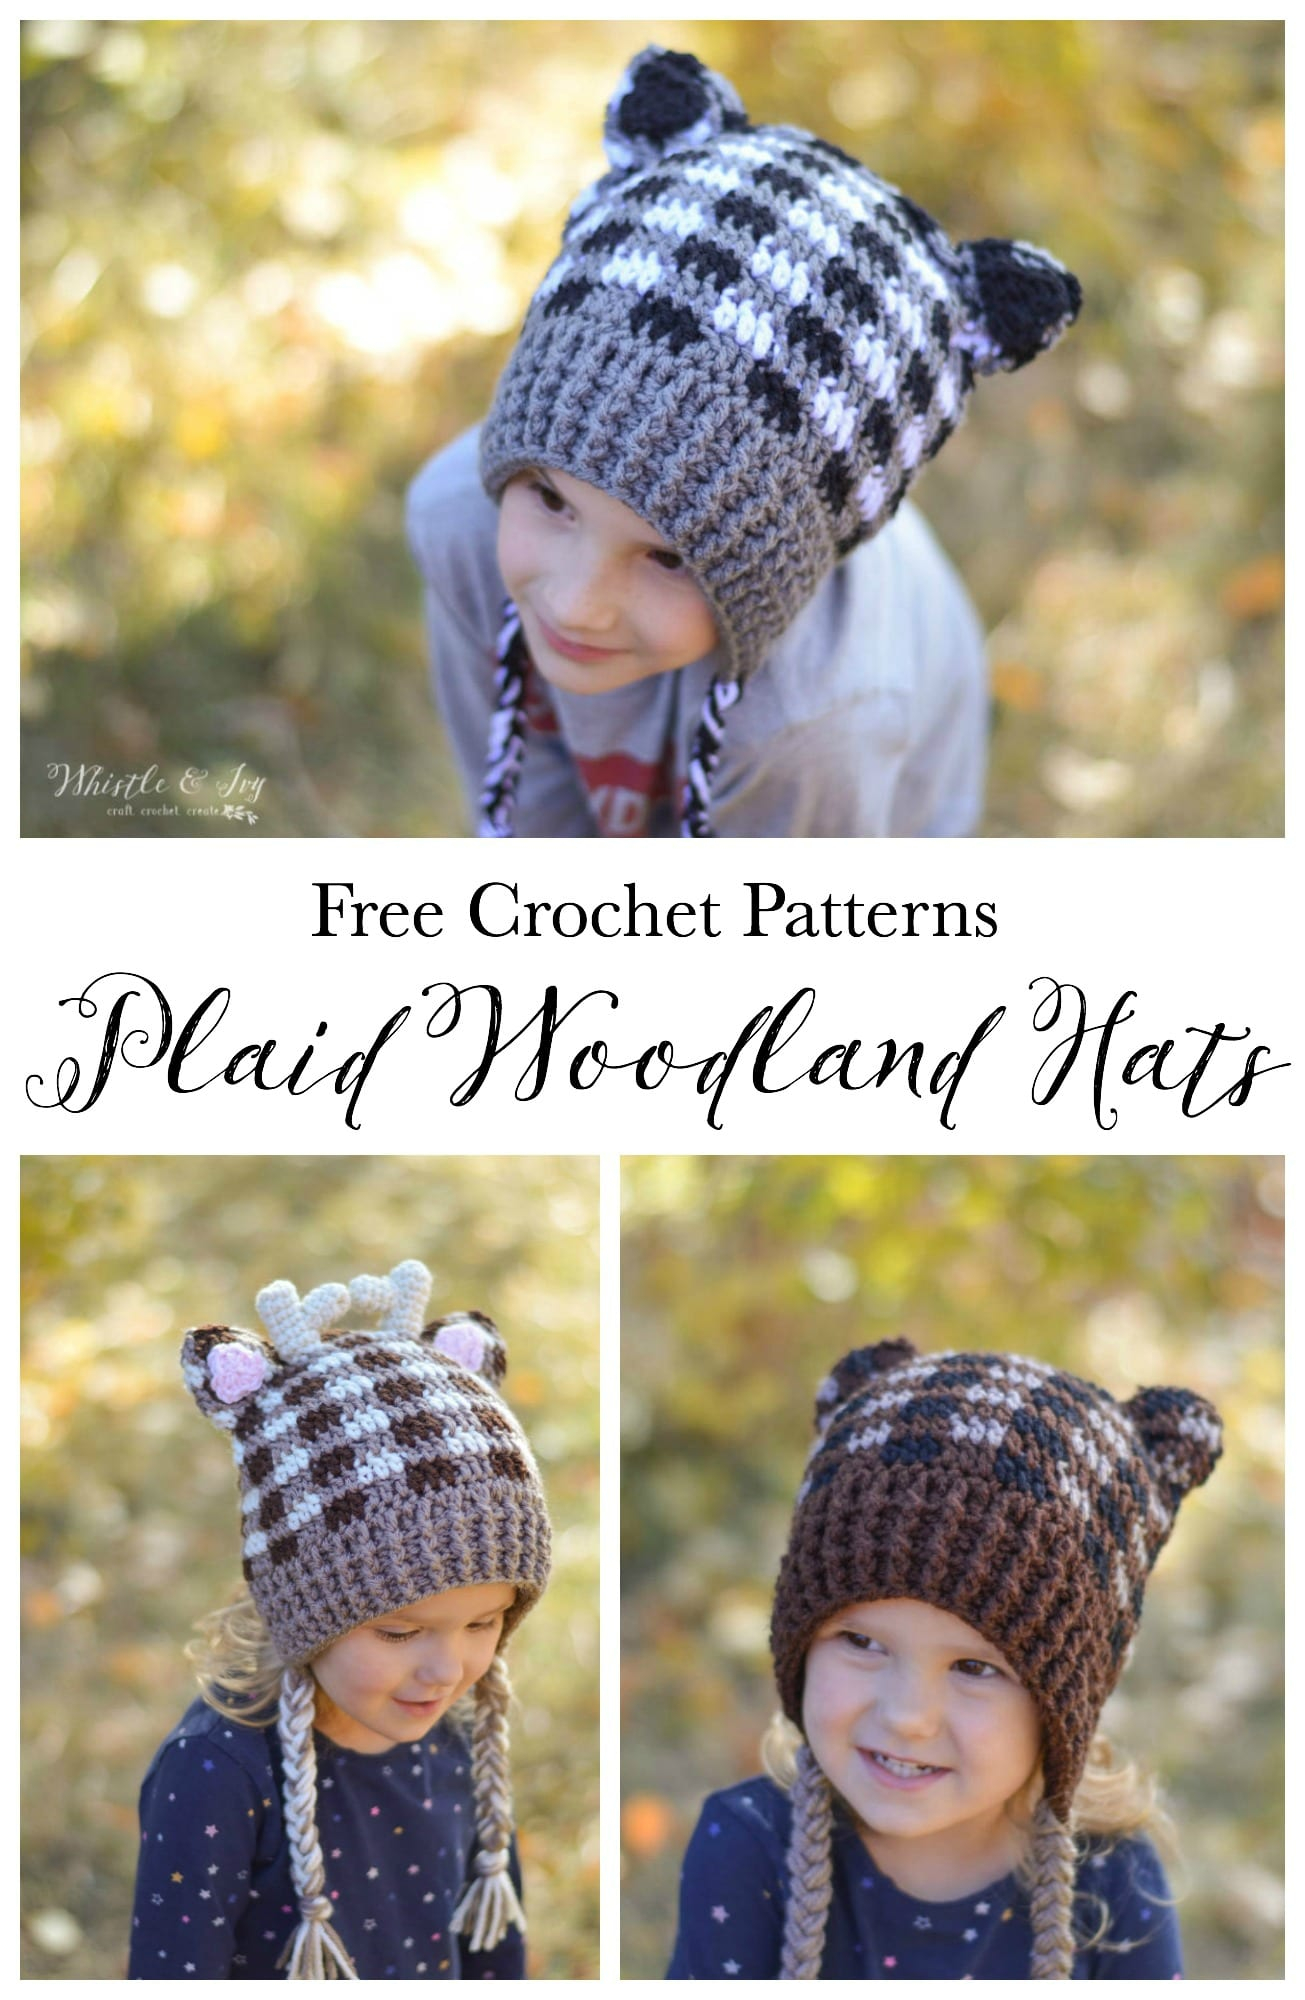 Free Crochet Hat Patterns For Adults Plaid Crochet Woodland Animal Hats Free Crochet Pattern Whistle